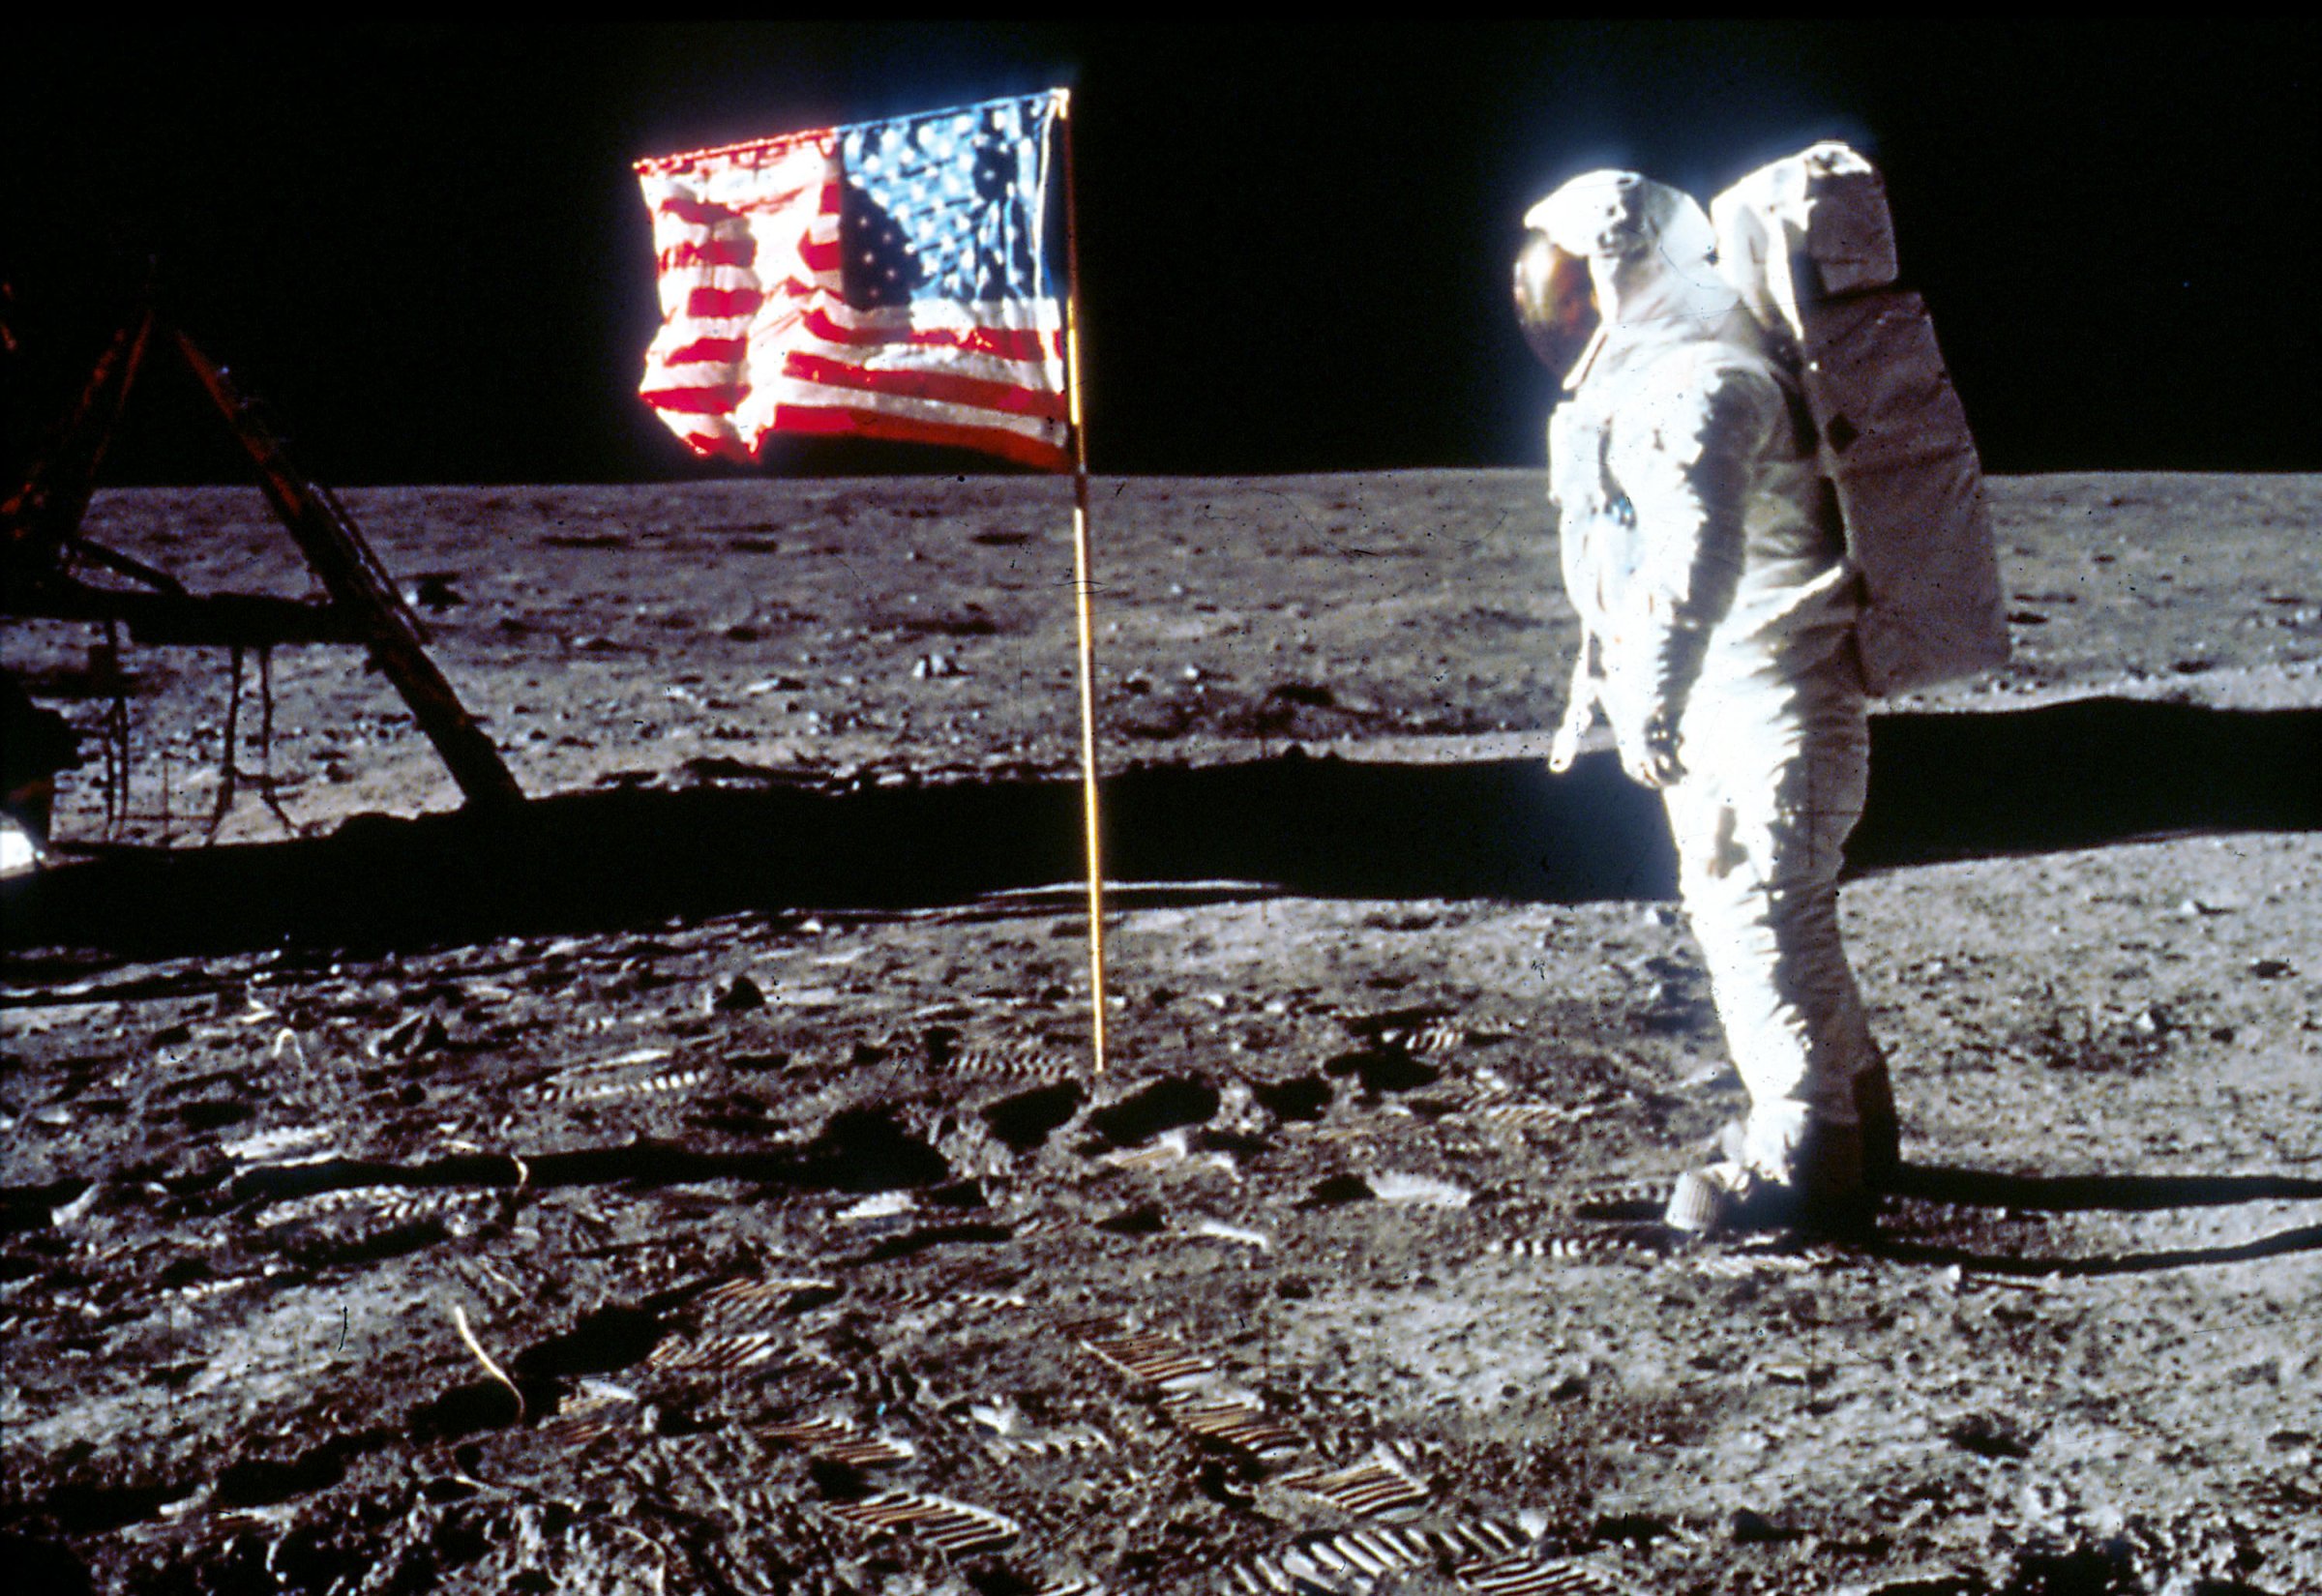 Buzz Aldrin Poses next To The U.S. flag On Moon